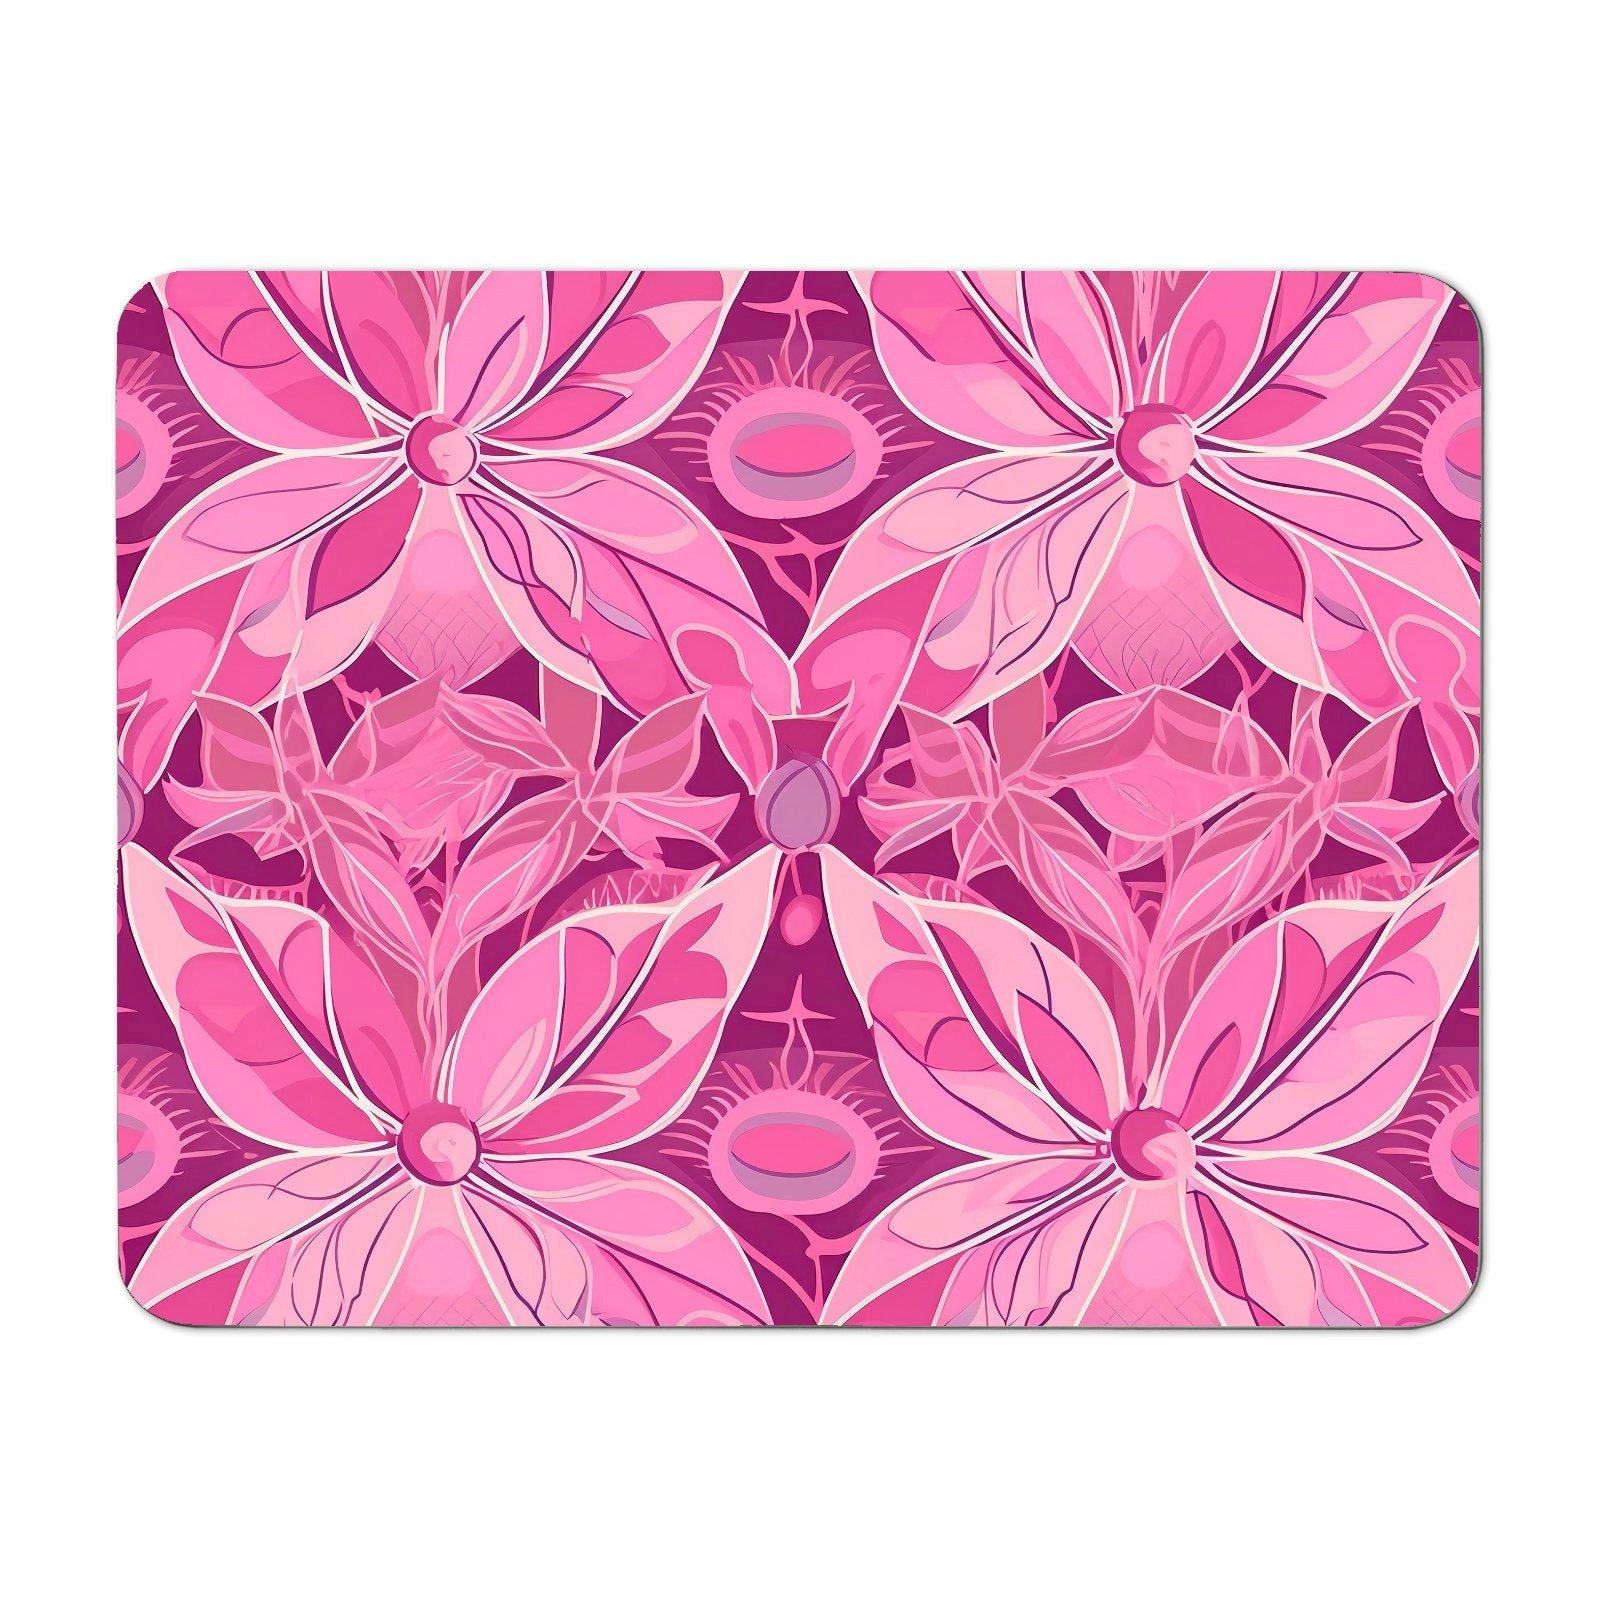 Pink Abstract Floral Design Placemats